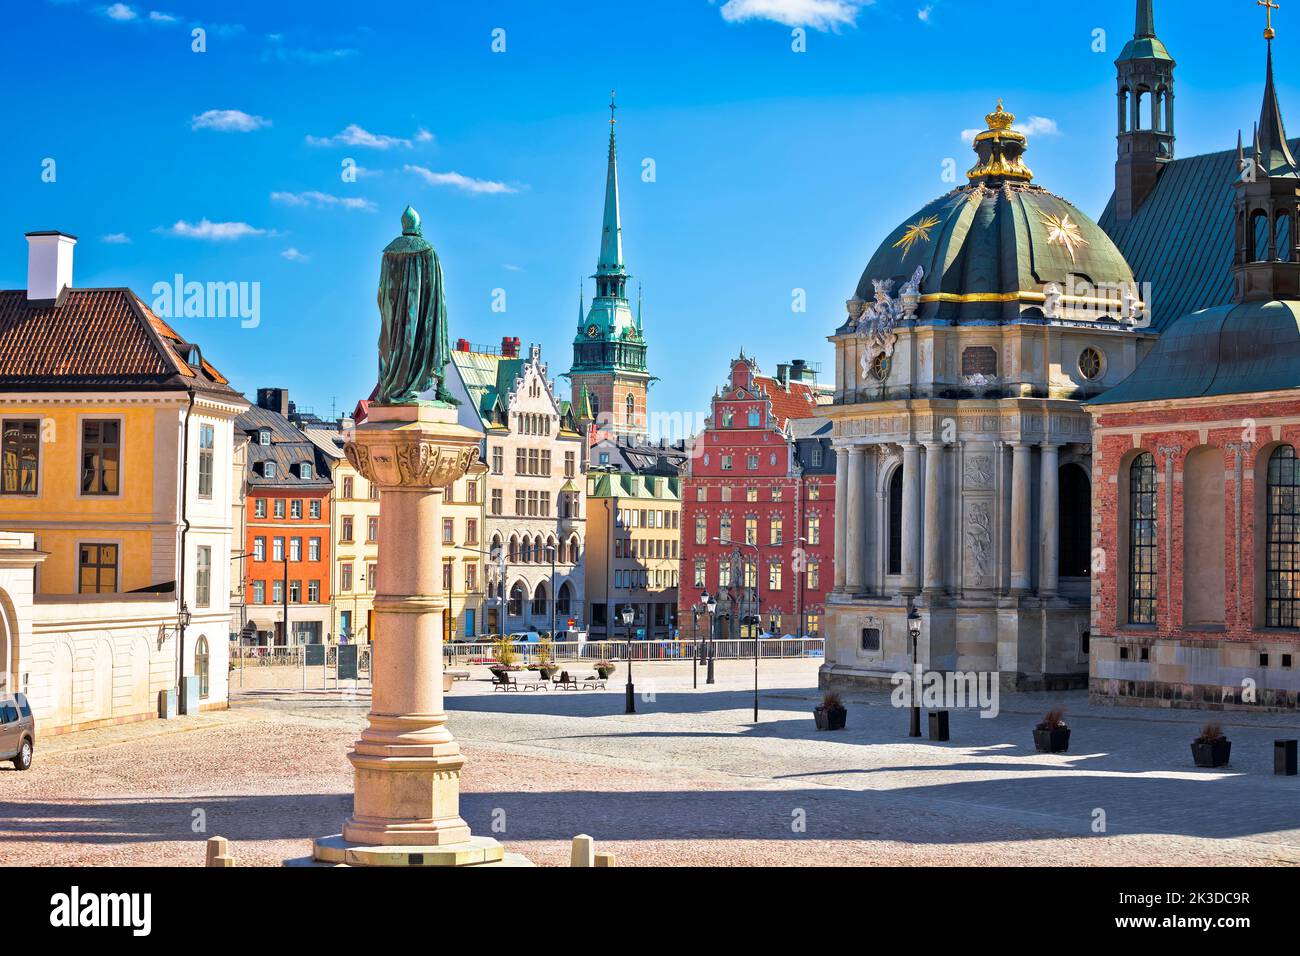 Stockholm city center historic architecture view, Riddarholmen square, capital of Sweden Stock Photo